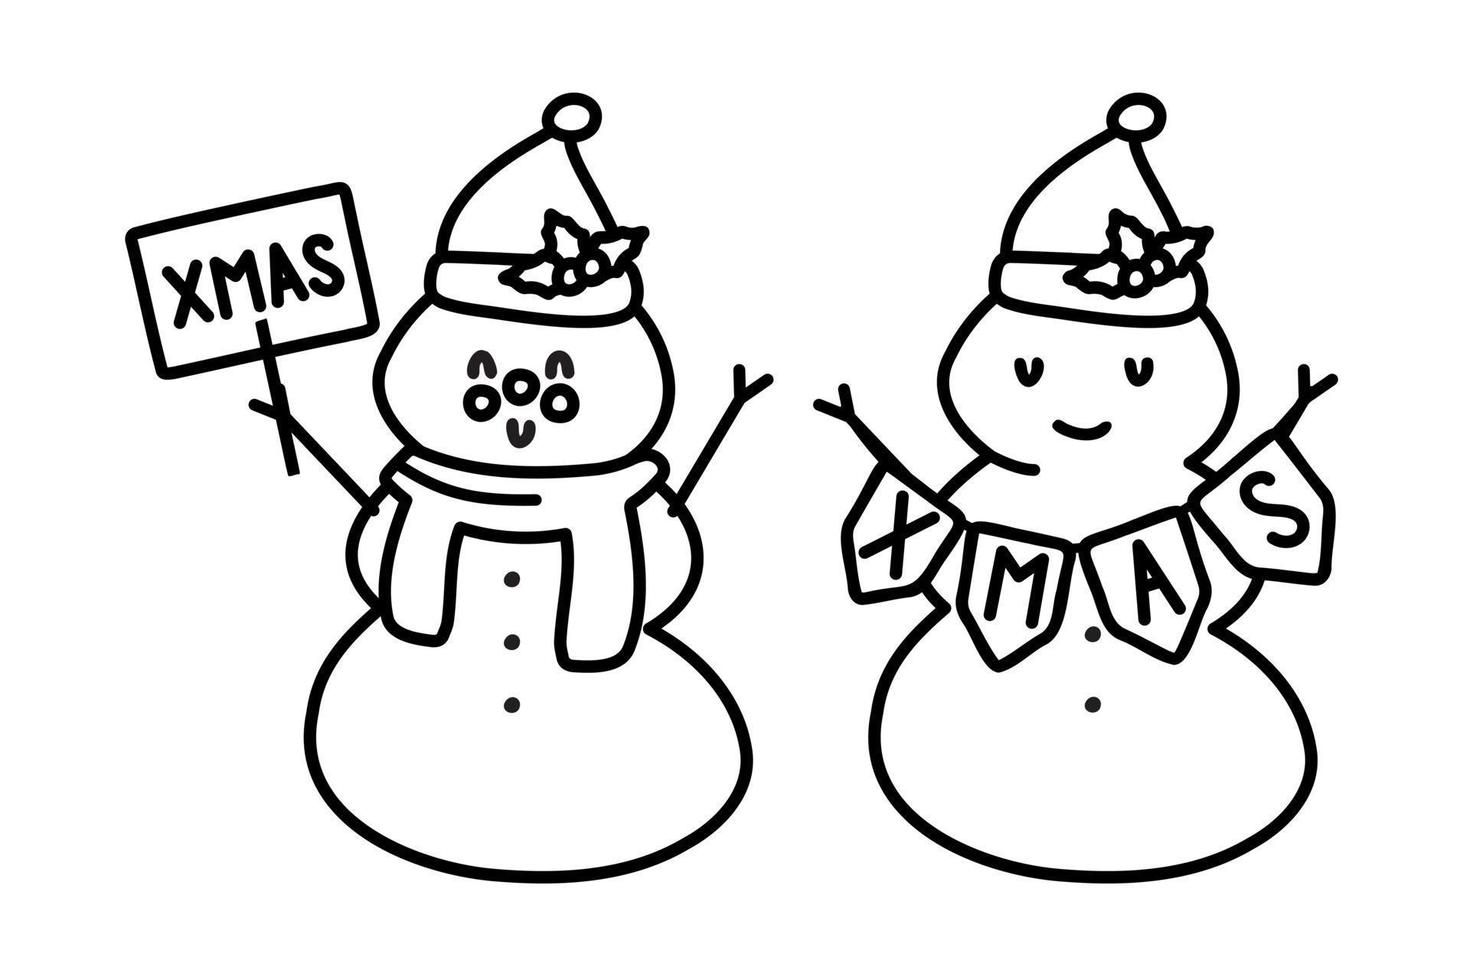 Doodle winter illustration of a snowman with a carrot and a Santa hat. Xmas. Design greeting cards, posters, gift wrapping. vector